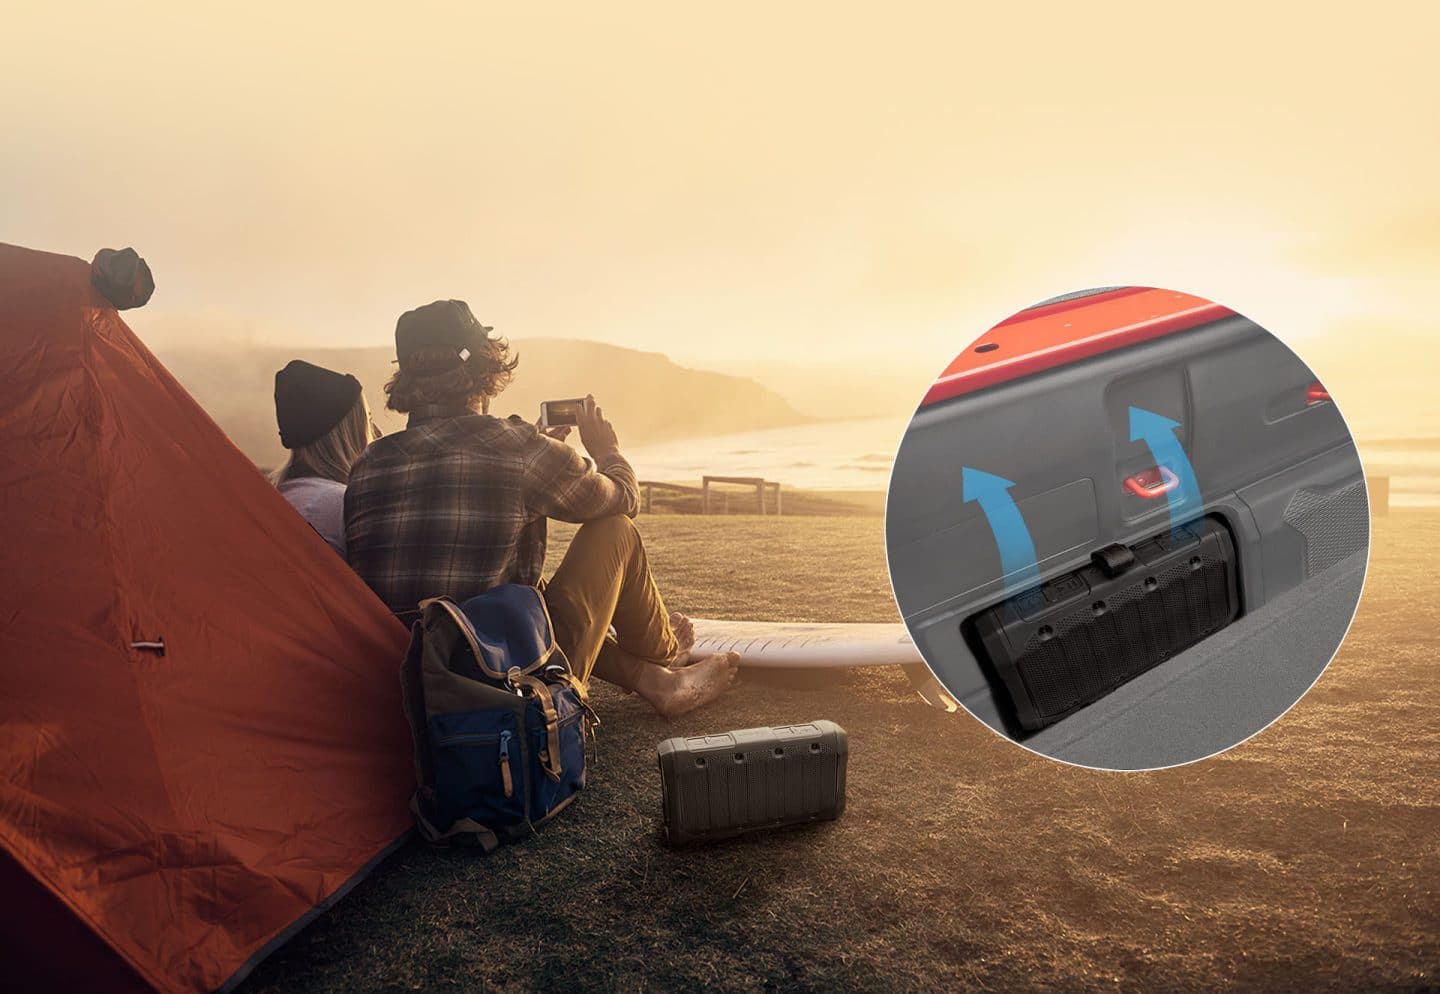 A couple camping on the beach with the man holding a smartphone with an available Bluetooth speaker on the ground beside him. Inset image of the Bluetooth speaker in its charging port in the 2023 Jeep Gladiator.